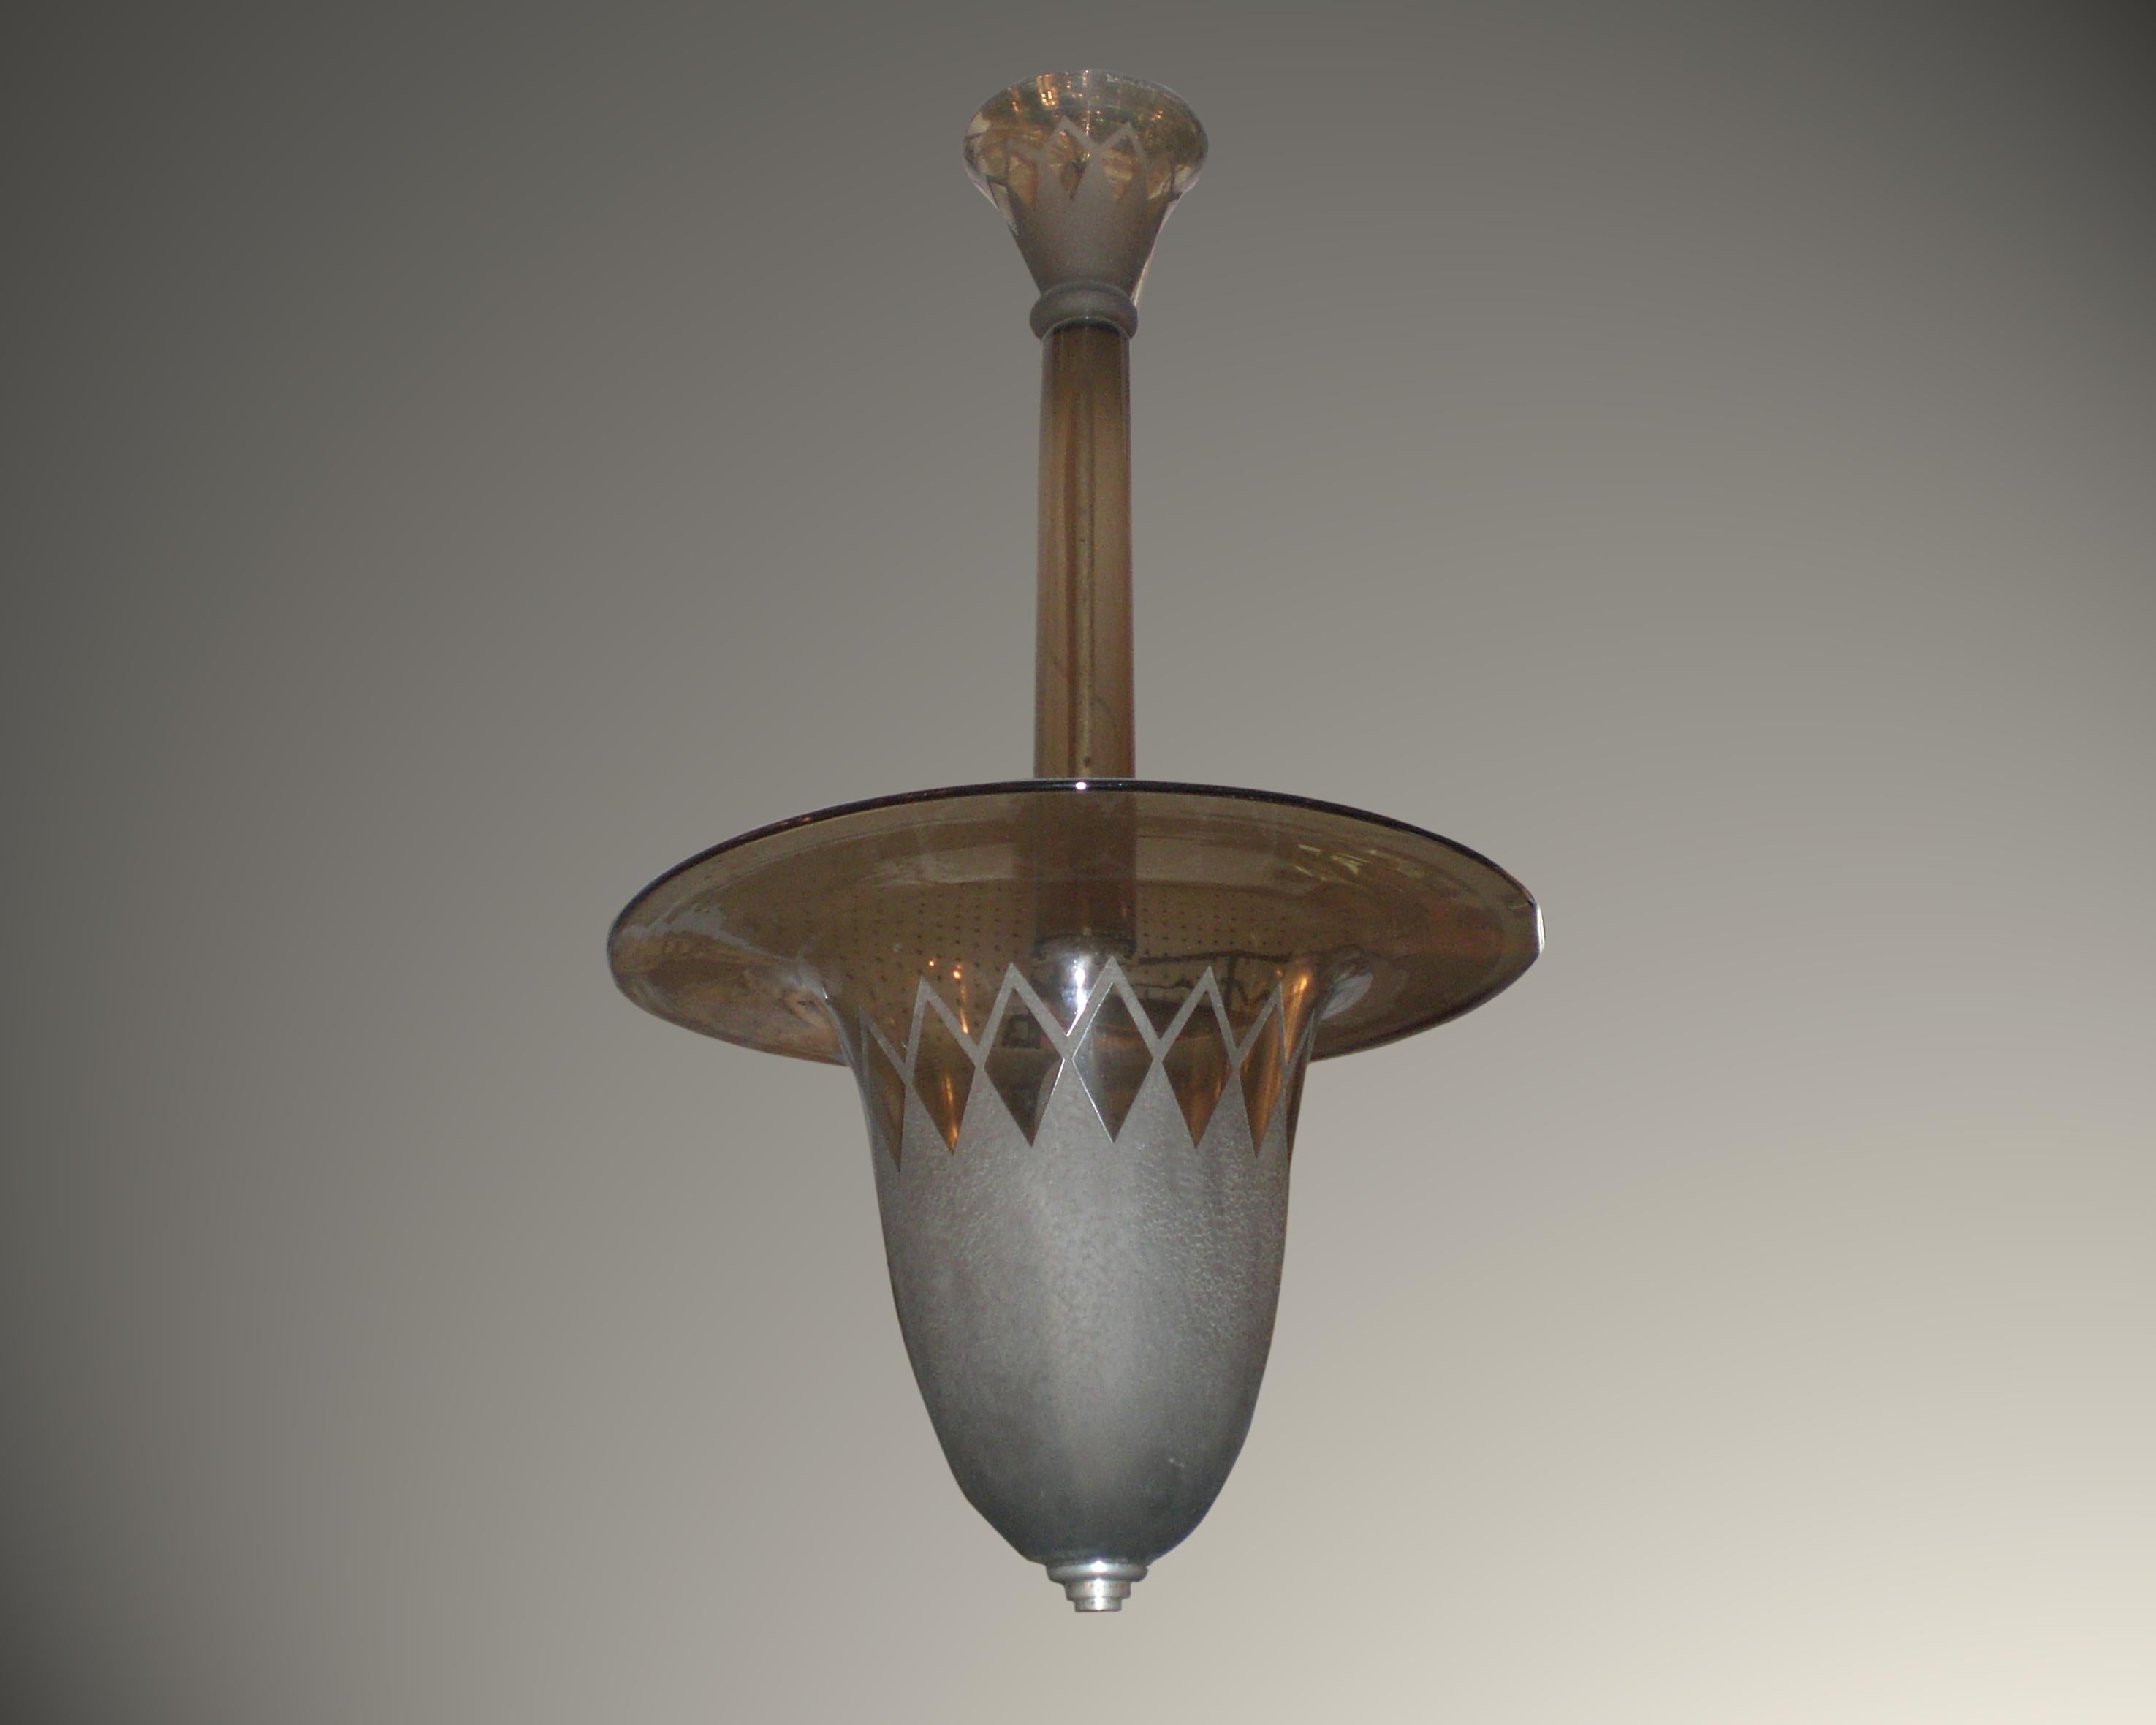 Original French Art Deco smoke tinted acid etched art glass chandelier by Daum Nancy. A polished and frosted bell shaped dome bearing diamond patterns is gracefully suspended by the original central glass shaft and ends with the original matching